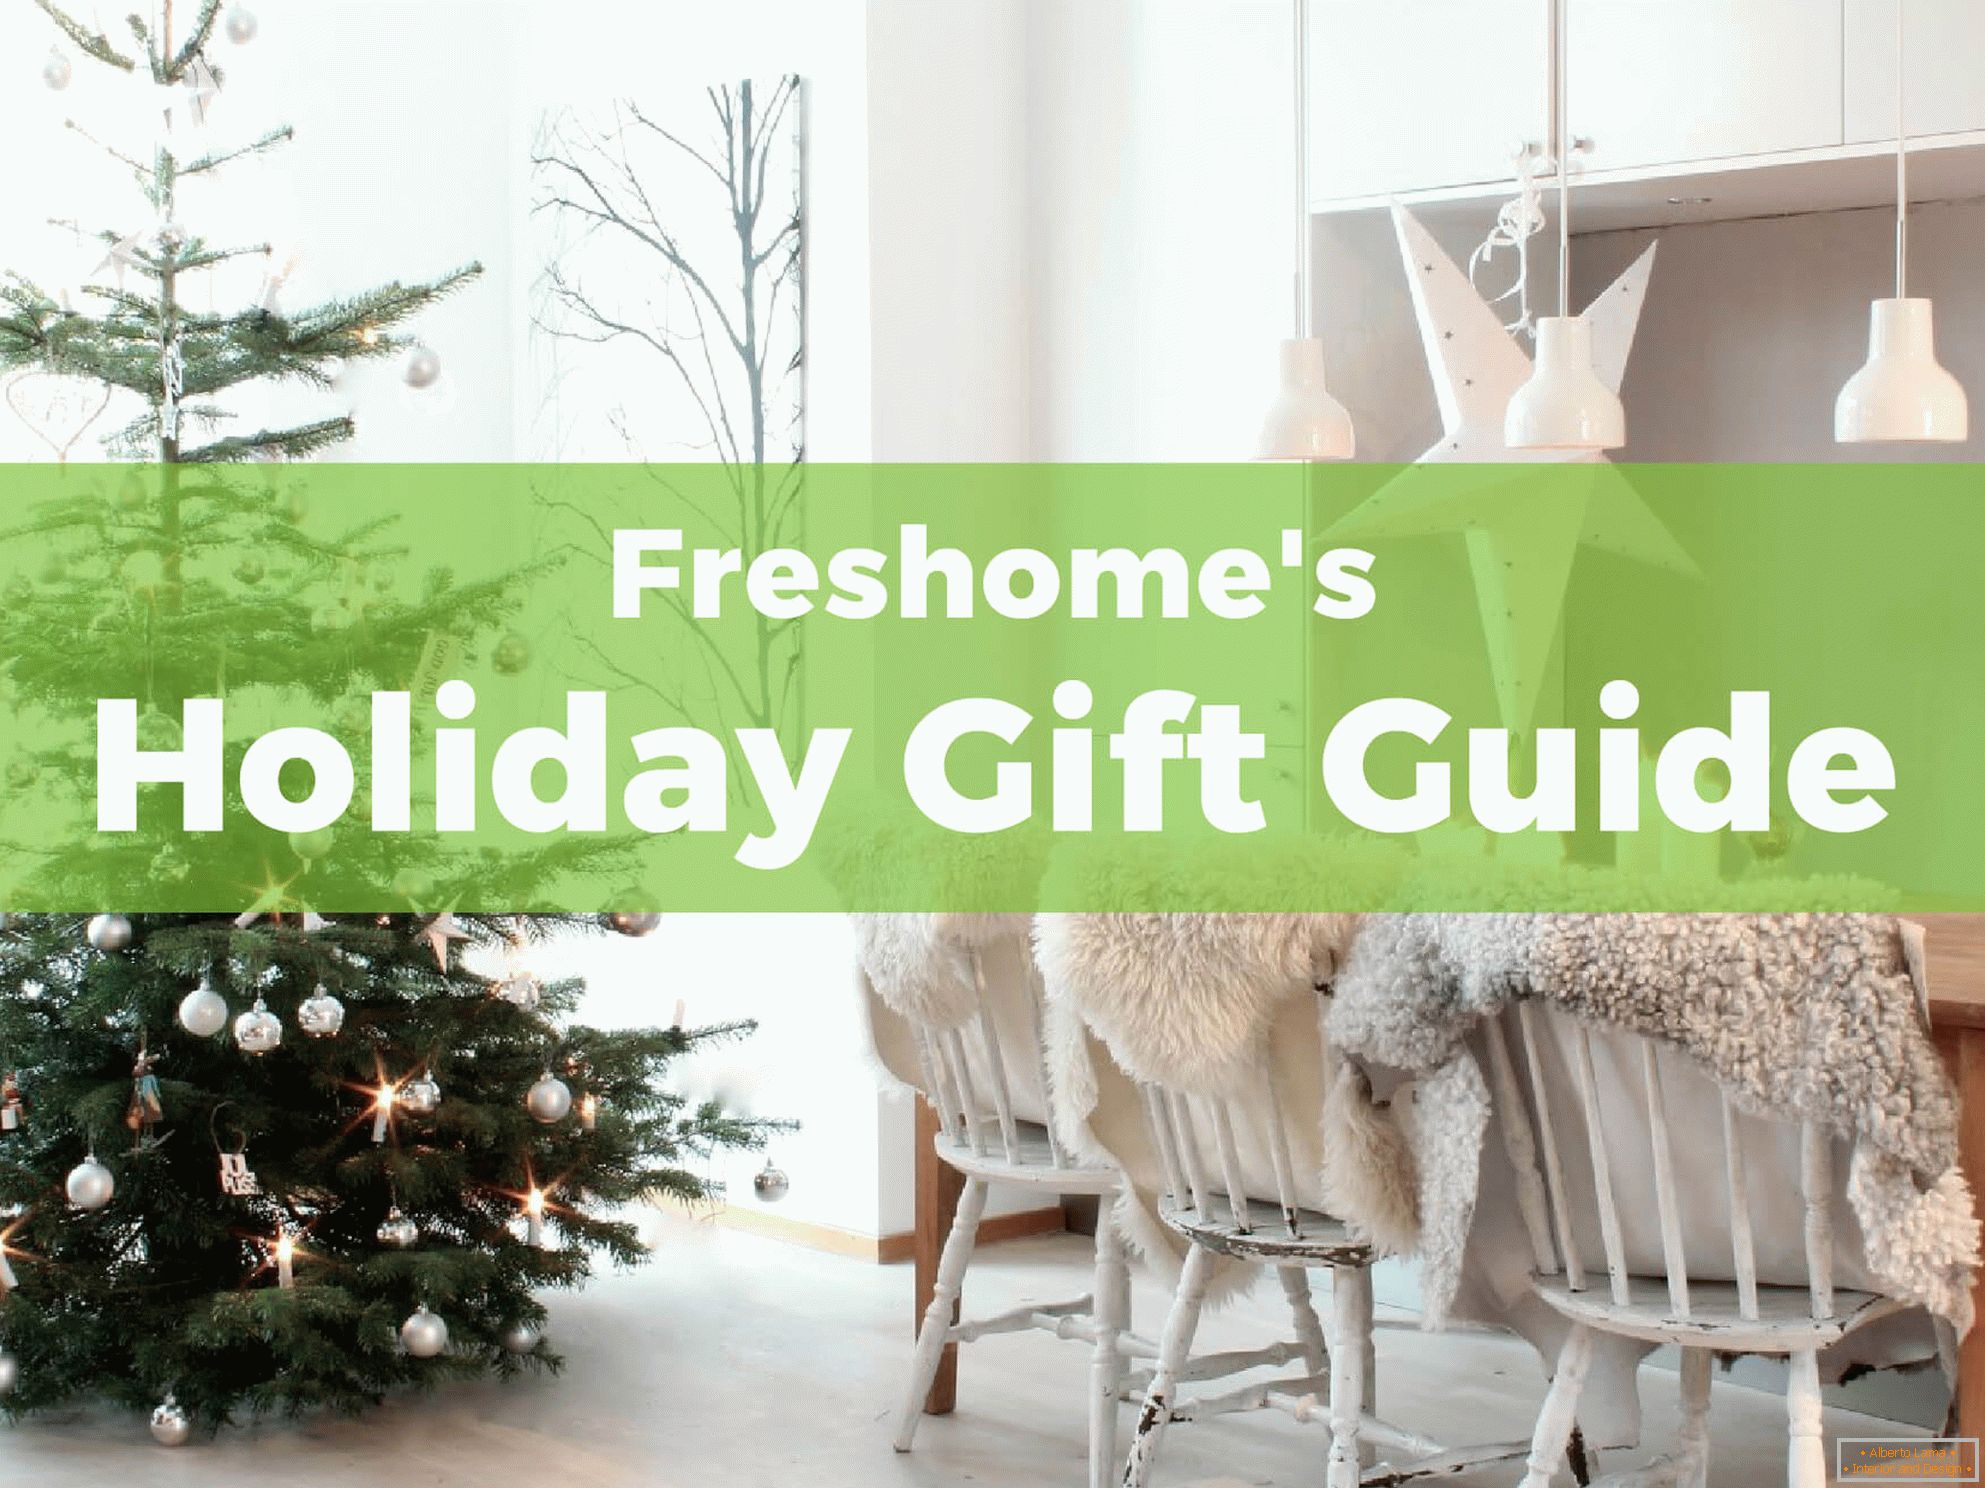 Interesting gift ideas - how to simply decorate the interior